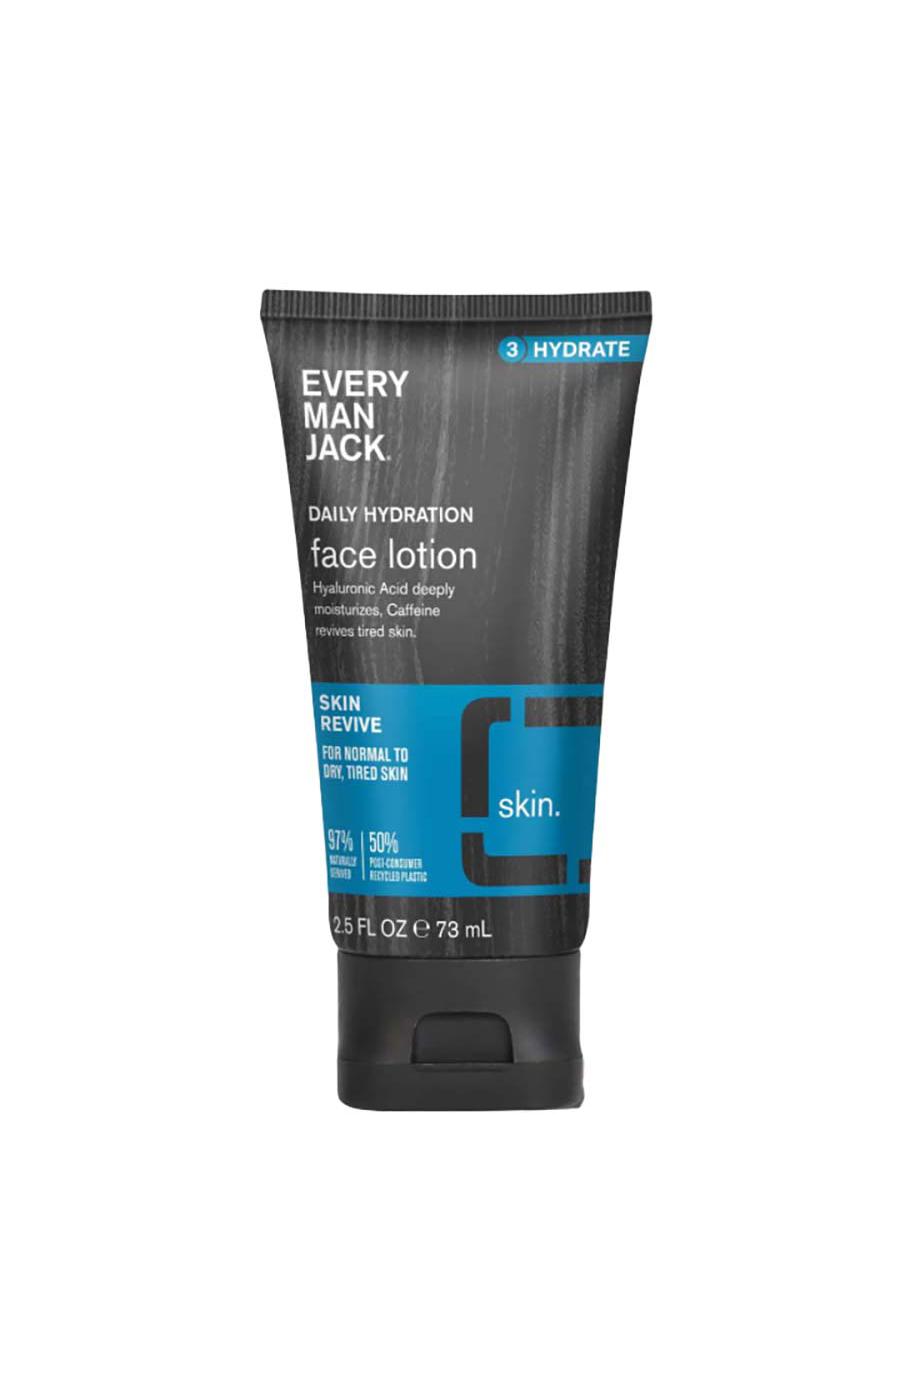 Every Man Jack Skin Revive Face Lotion; image 2 of 2